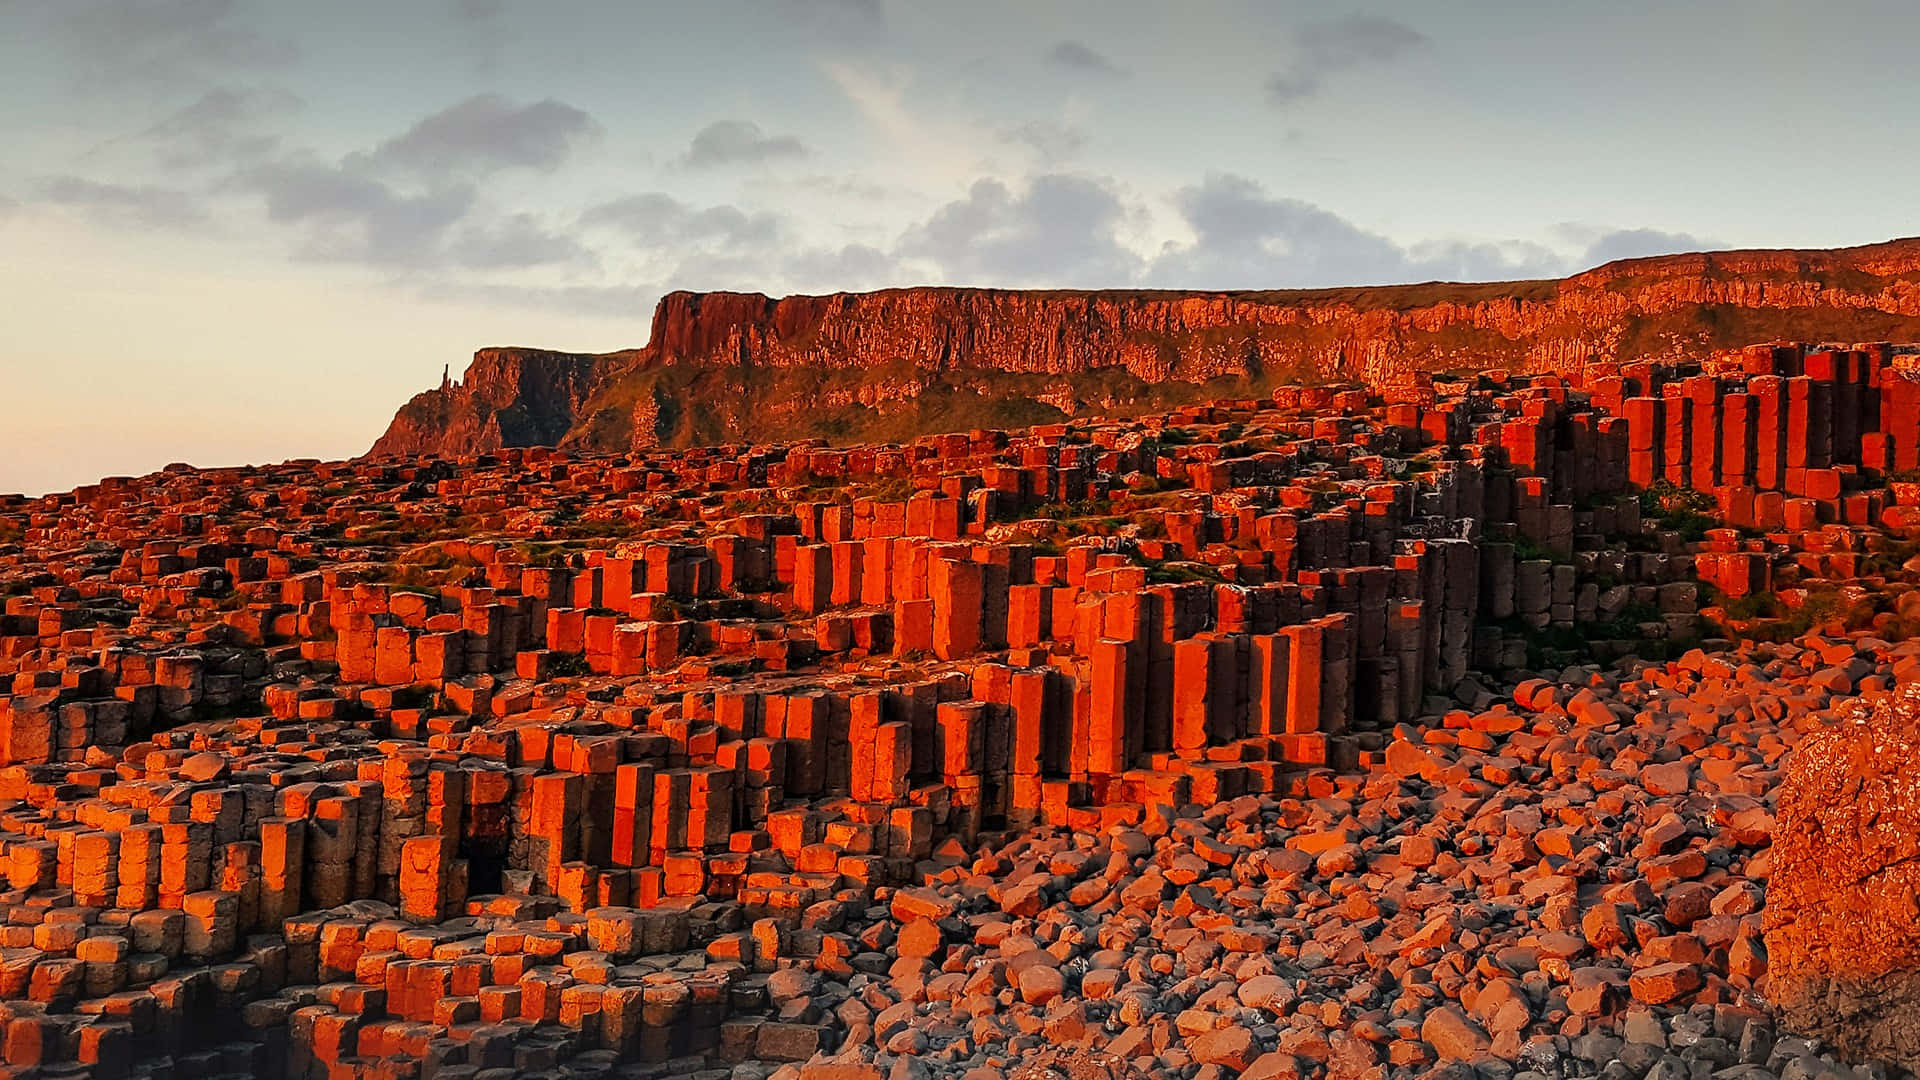 Majestic view of the Giant's Causeway with reddish rocks under the blue sky. Wallpaper